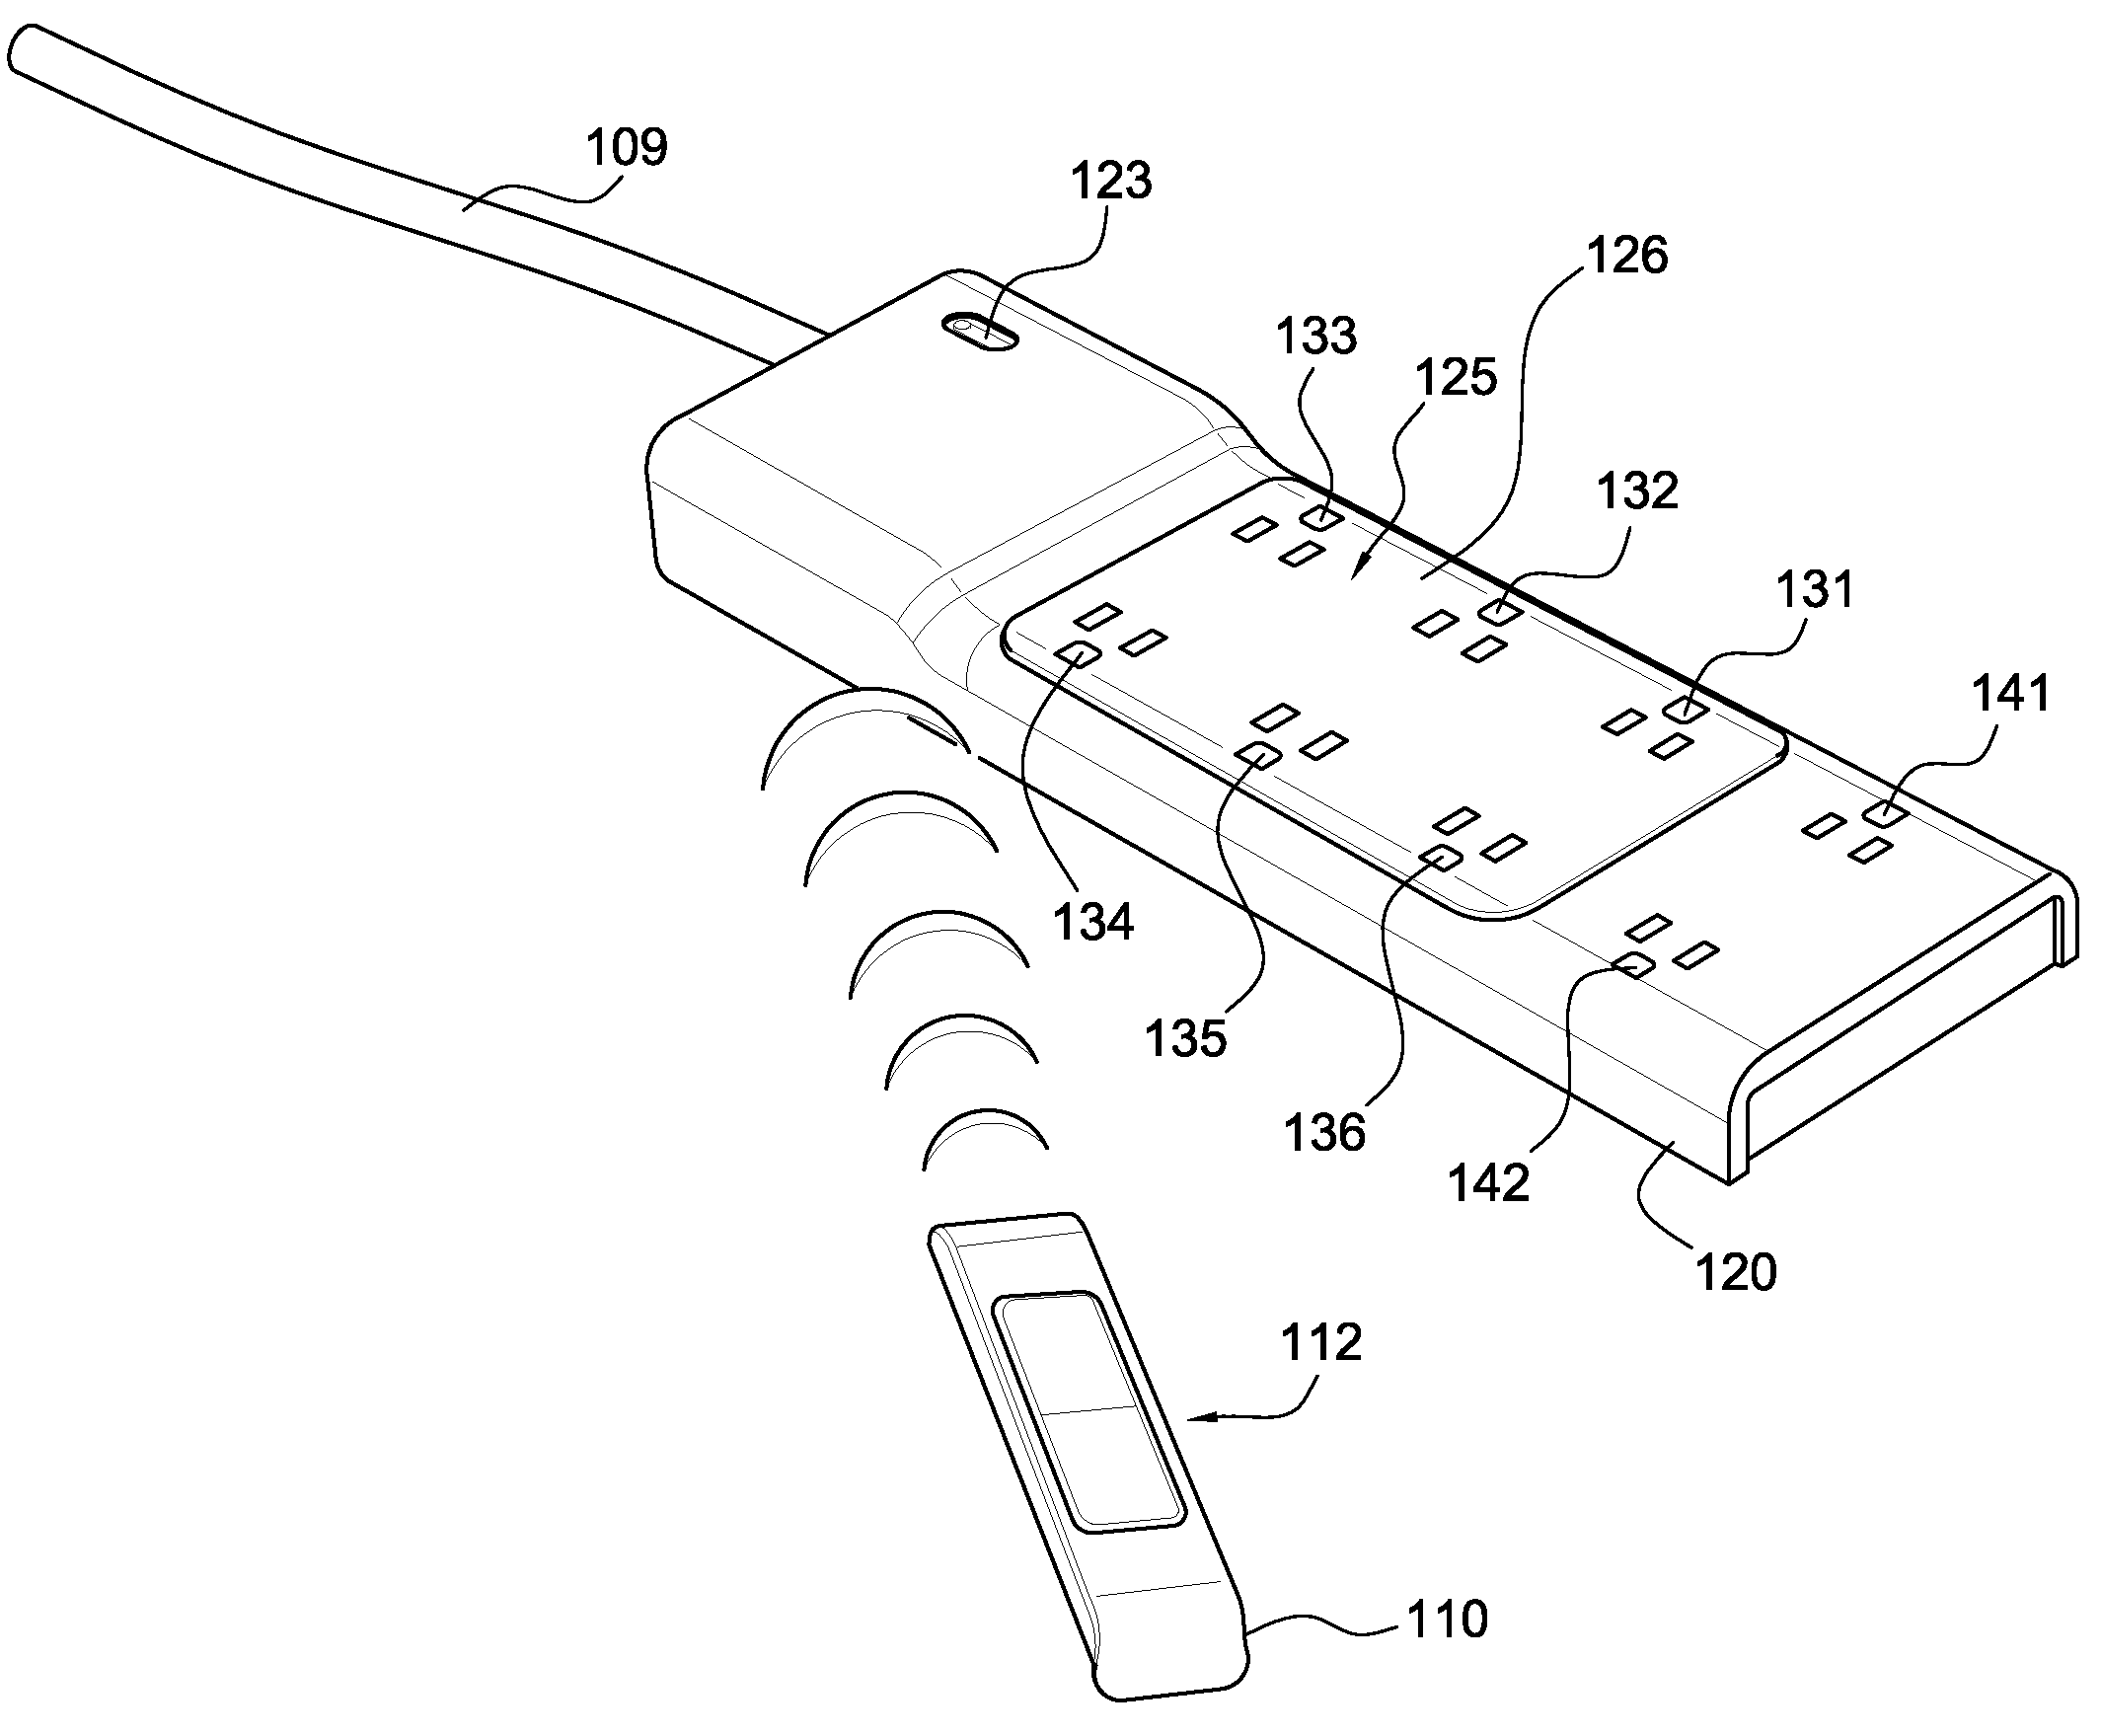 Apparatus For Providing Electrical Power To Electrical Device And Method Of Use